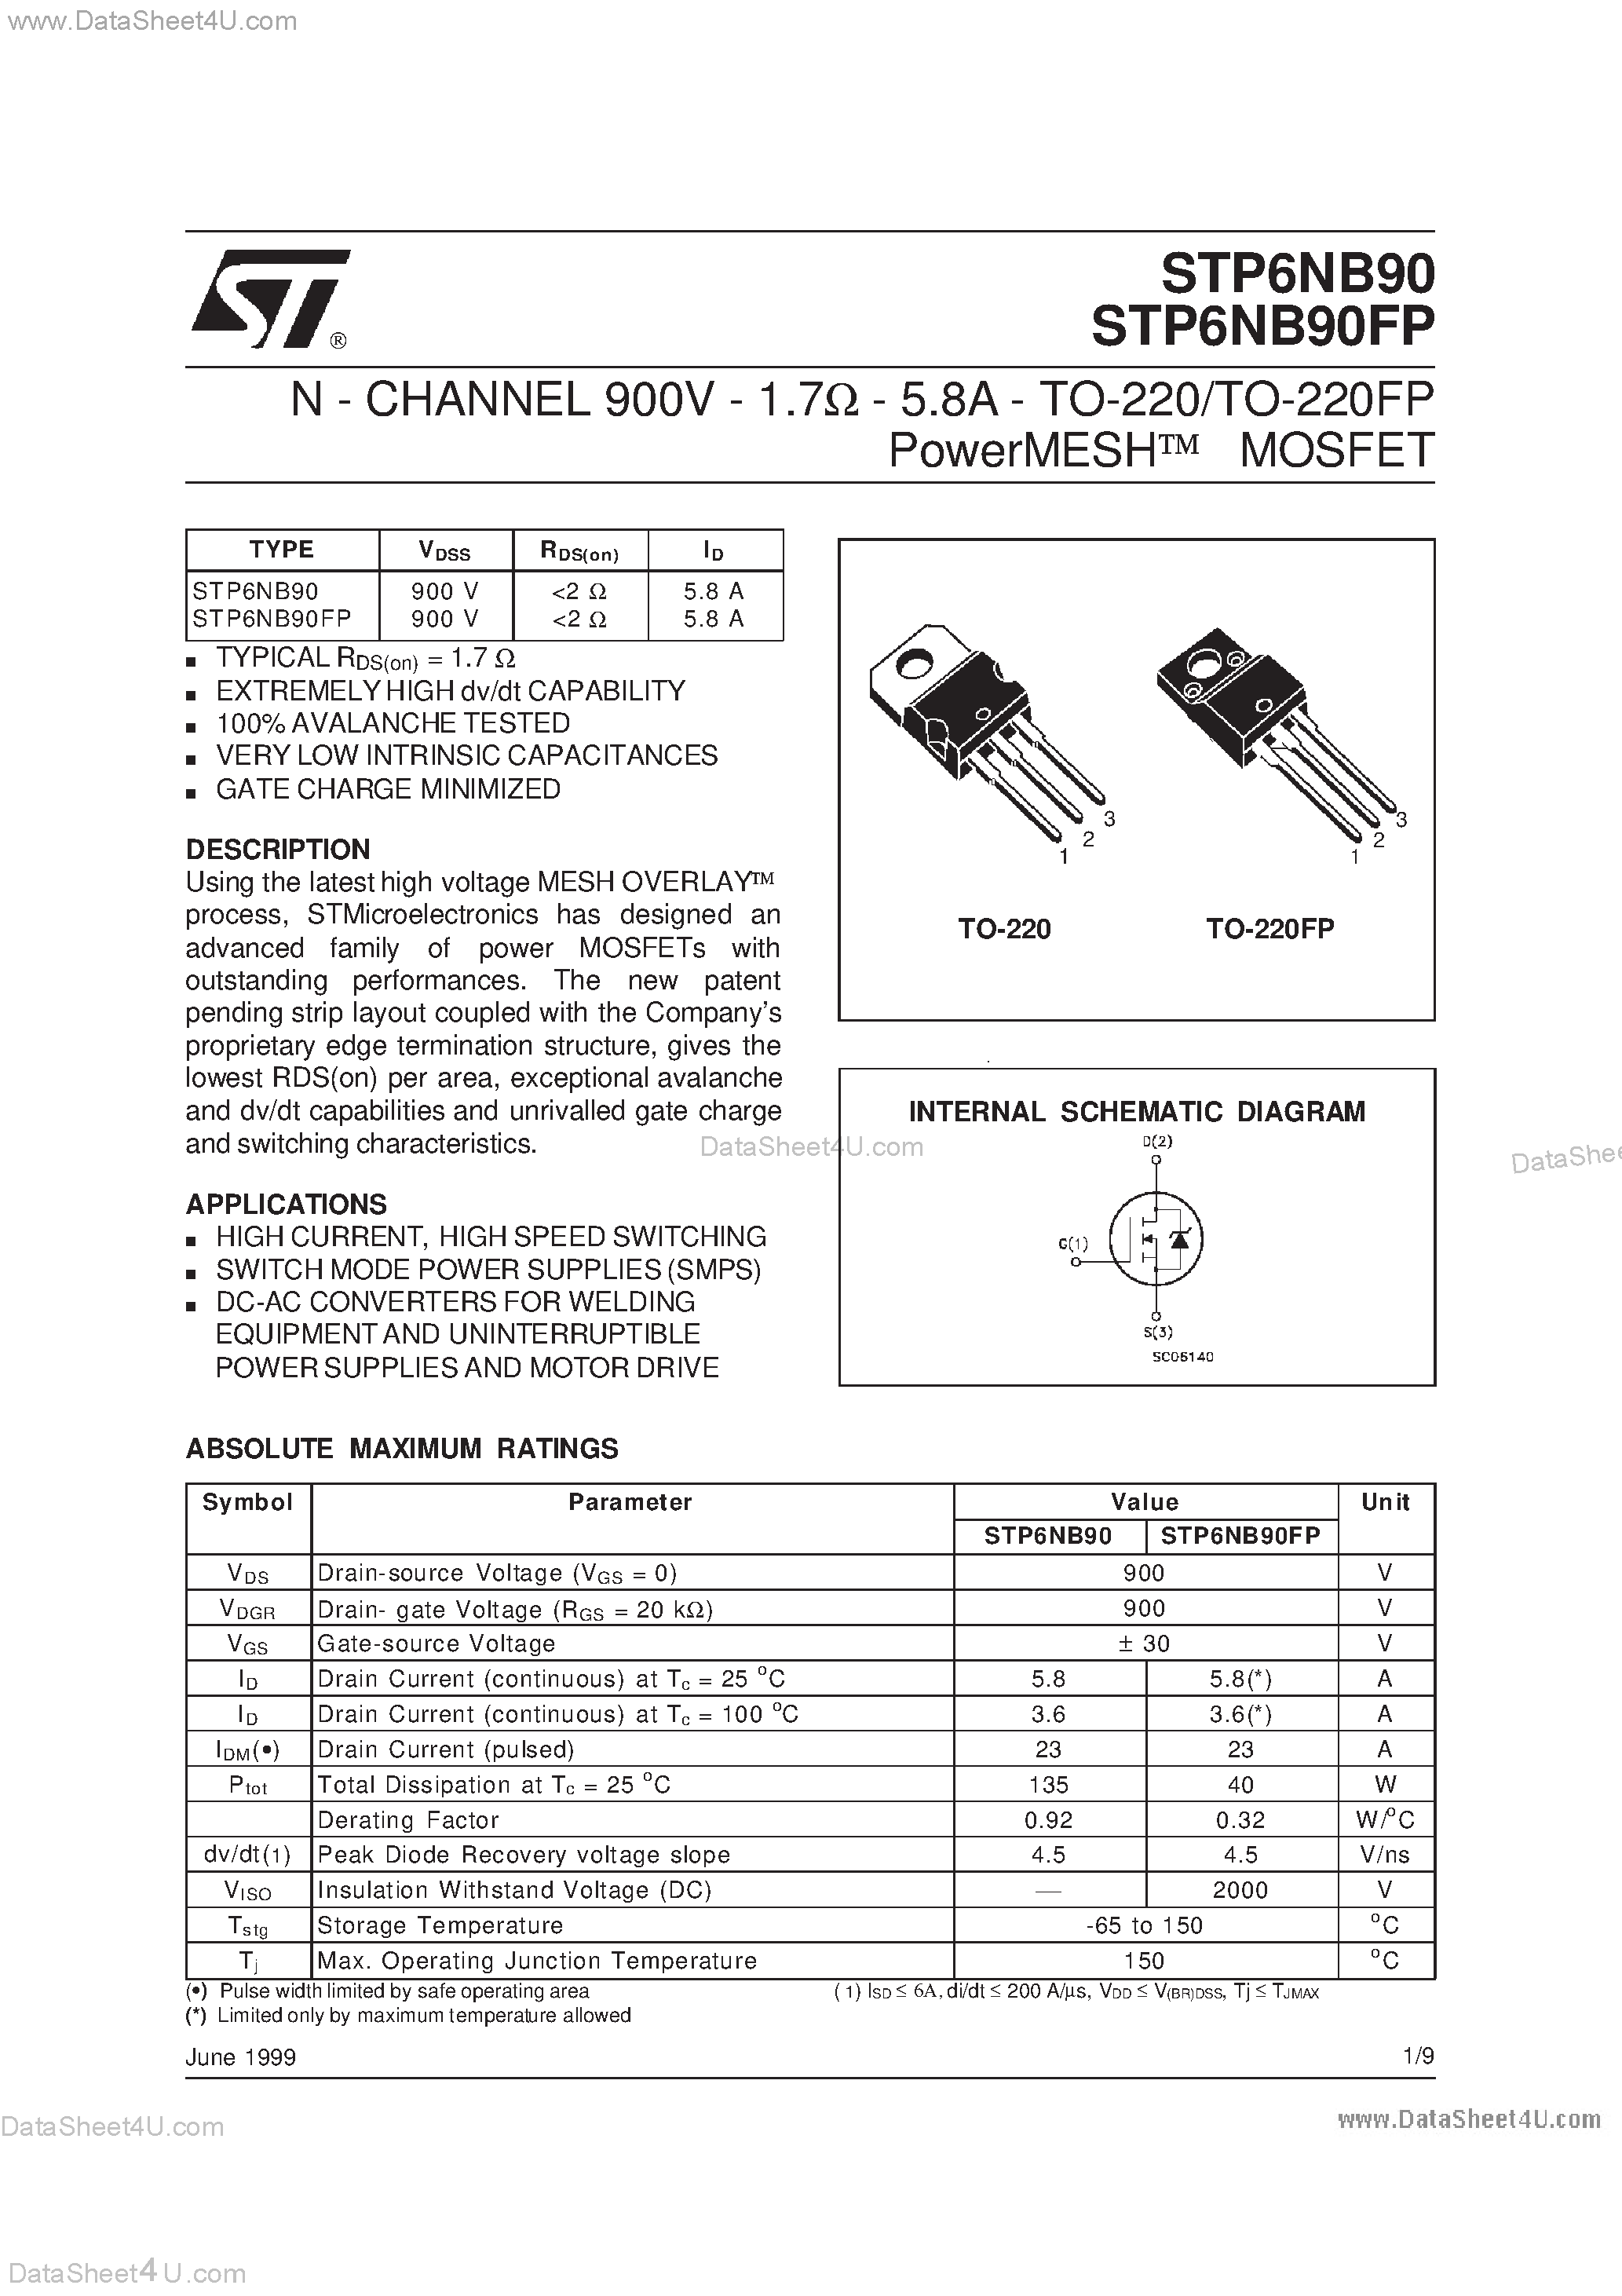 Даташит STP6NB90 - N - CHANNEL 900V - 1.7ohm - 5.8A - TO-220/TO-220FP PowerMESH MOSFET страница 1